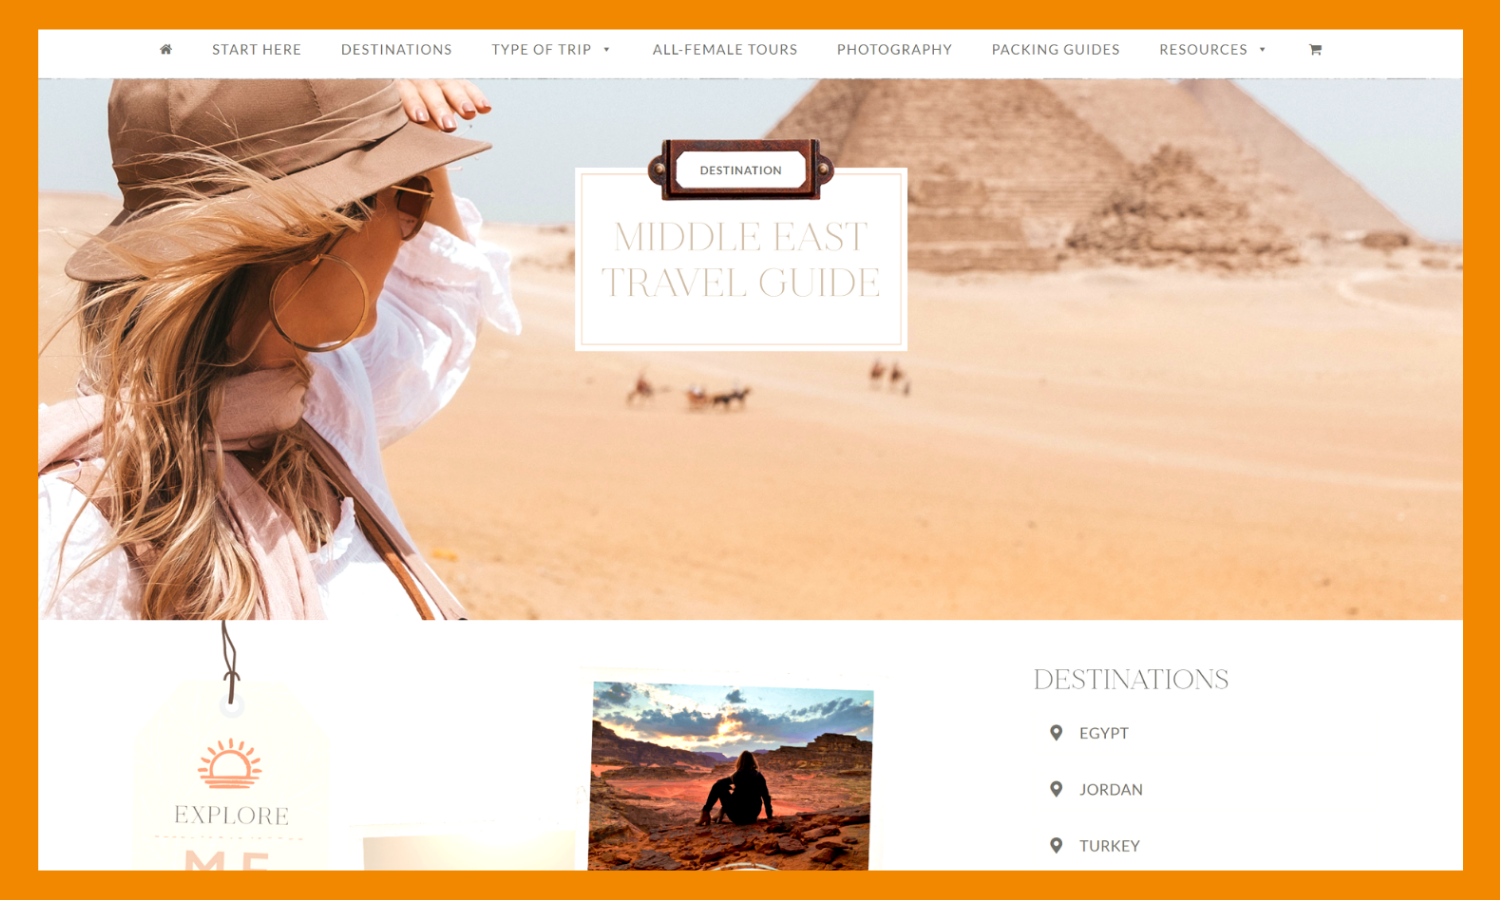 A screenshot of The Blonde Abroad 'Middle East Travel Guide' page. There is a big image of Kiersten (blonde hair and wearing a hat) looking over a dessert scene. 